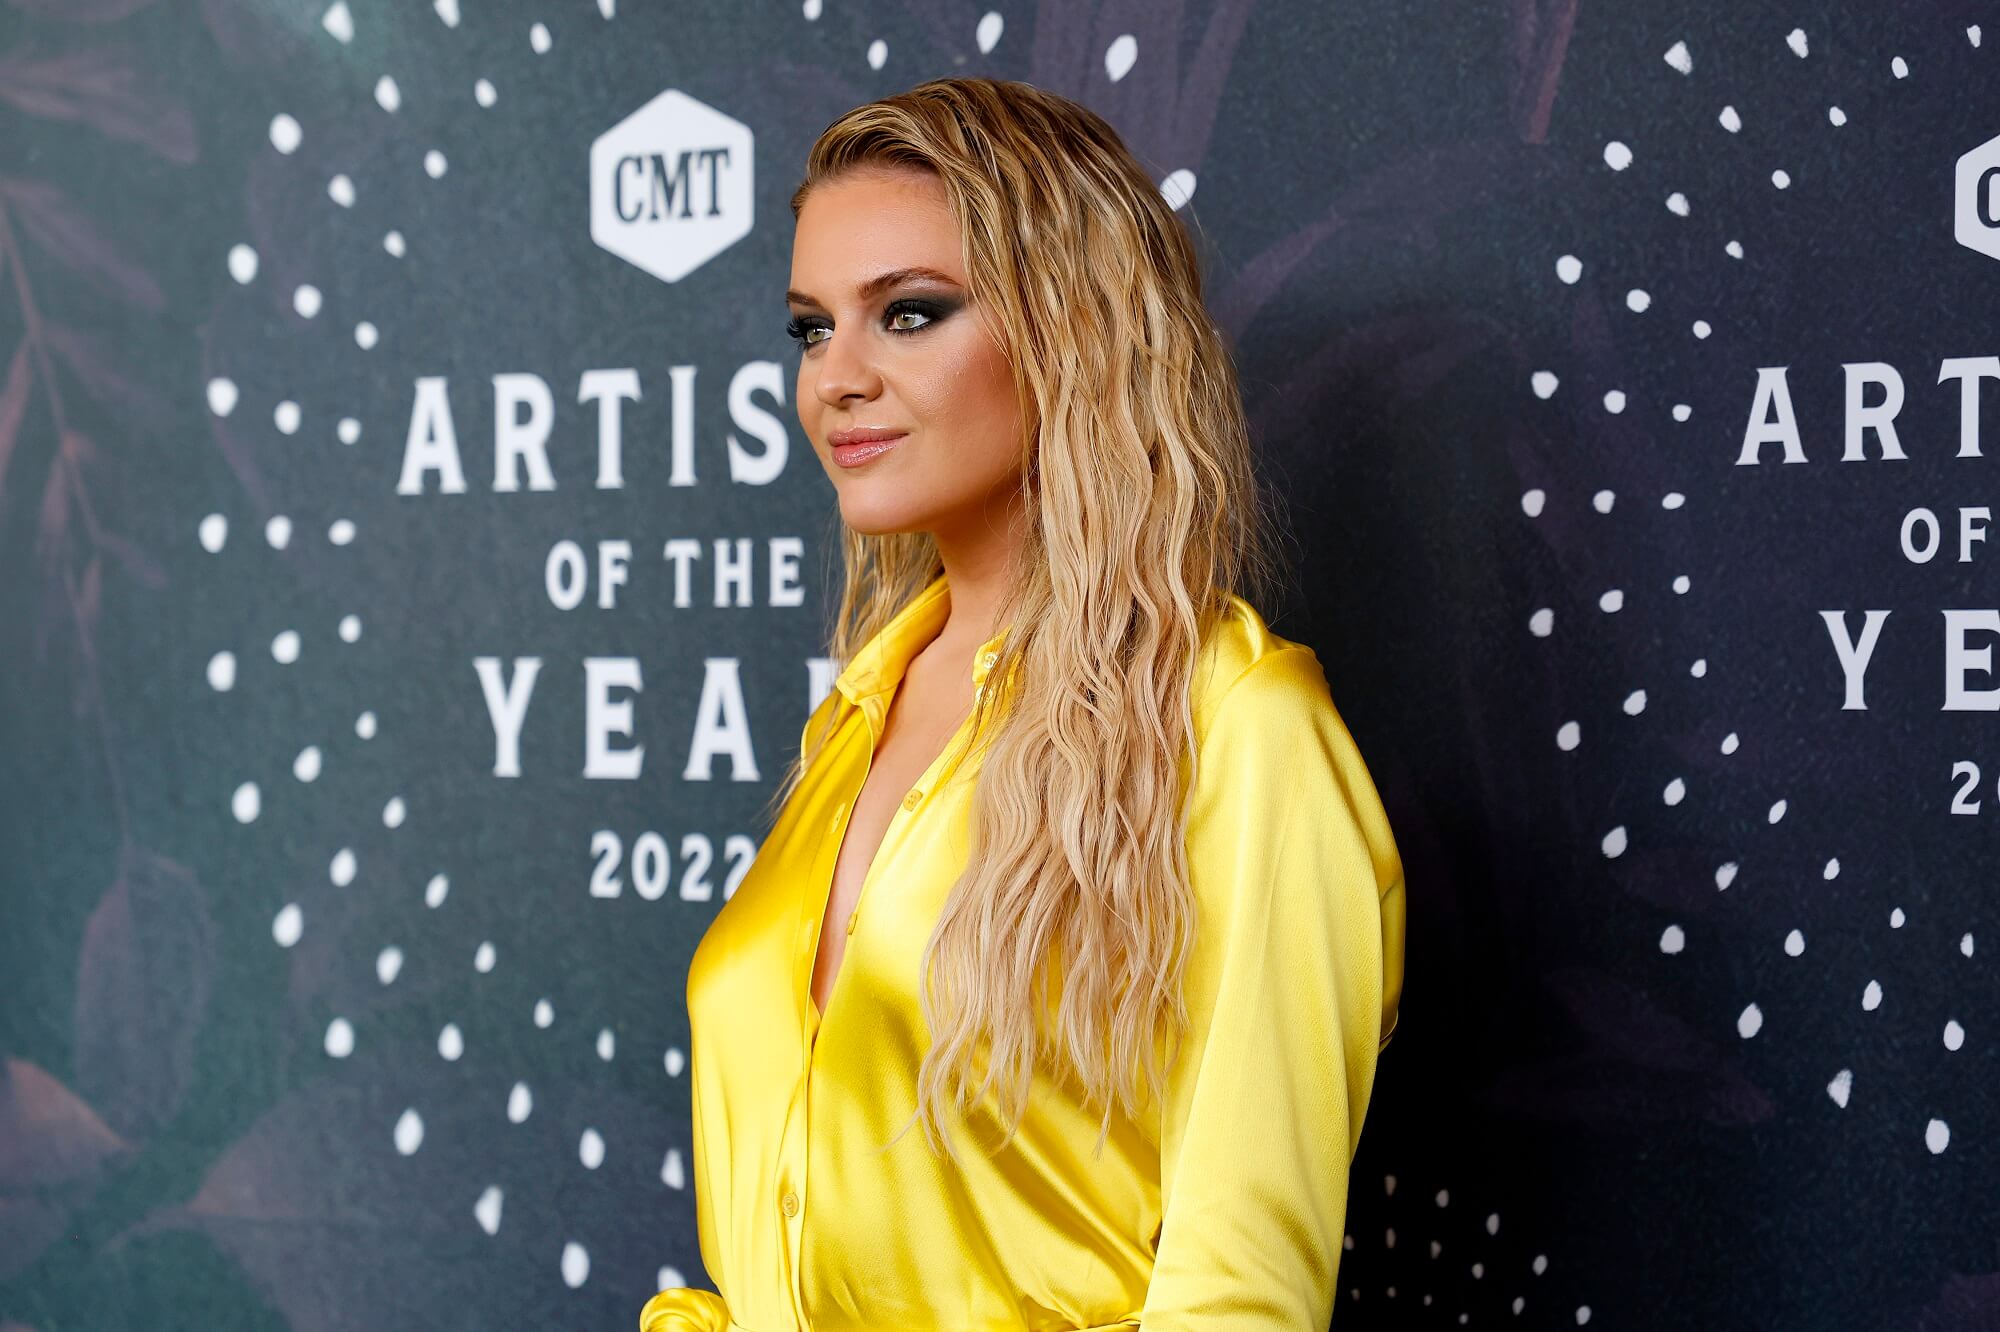 Kelsea Ballerini wears a long-sleeved yellow outfit in front of a black backdrop that reads 'CMT Artist of the Year 2022'